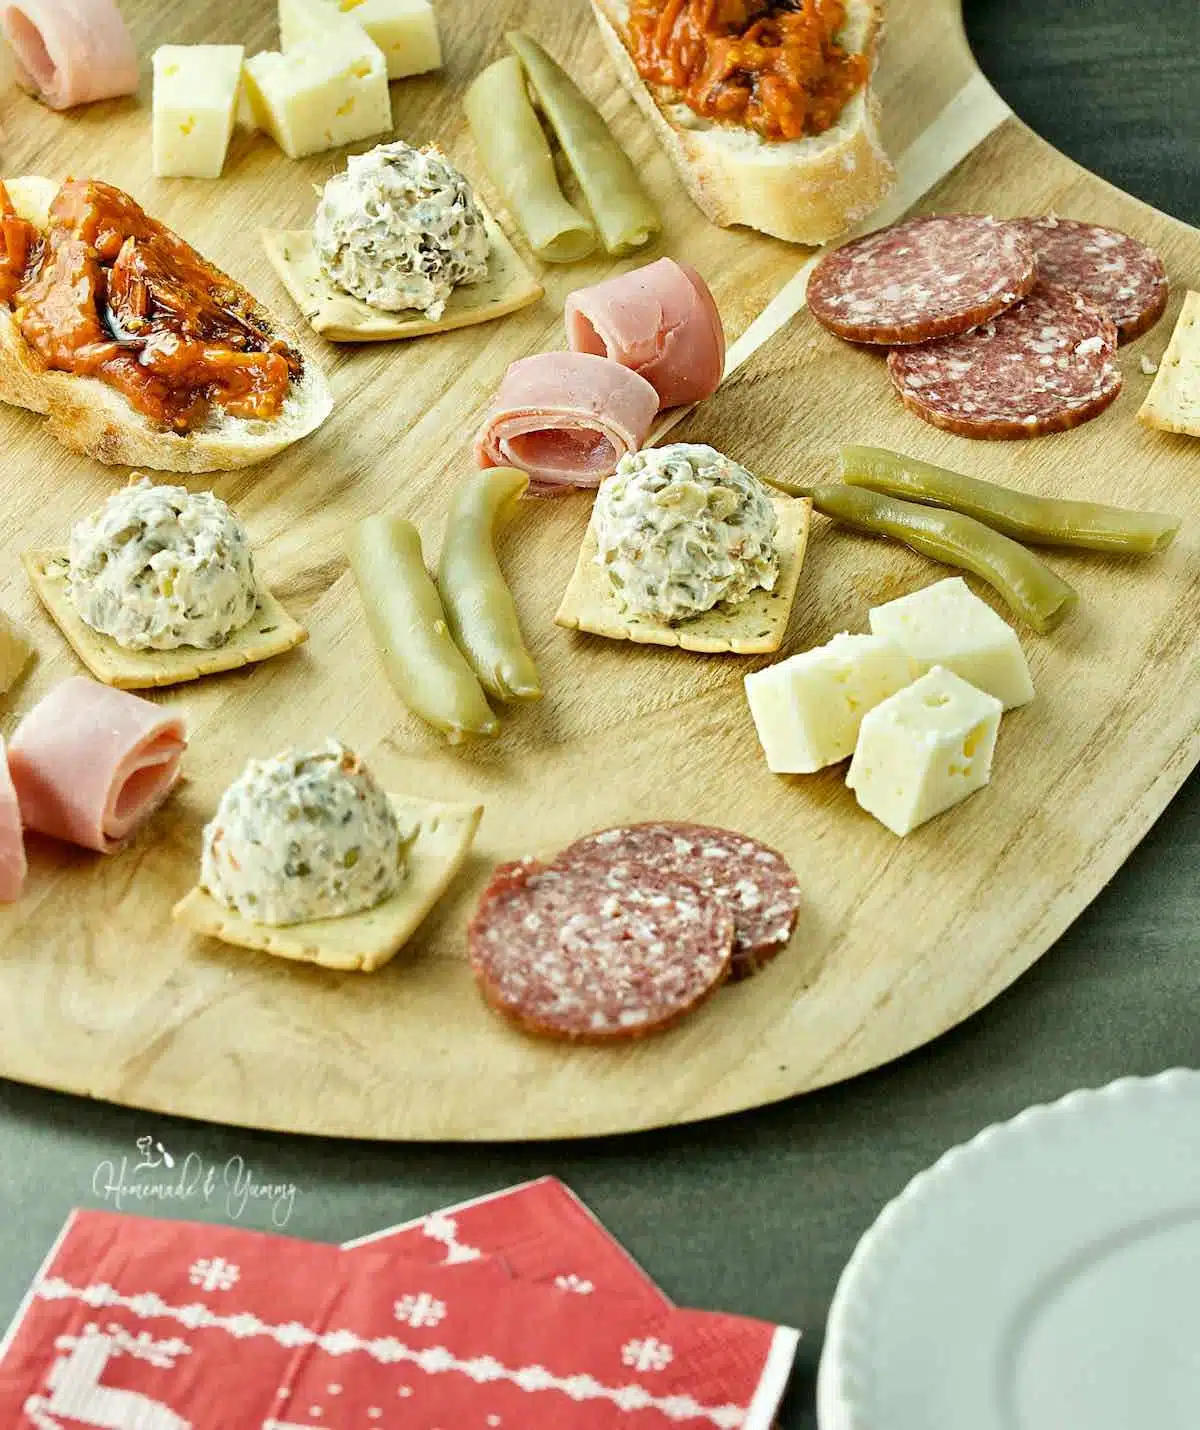 A party platter of appetizers.